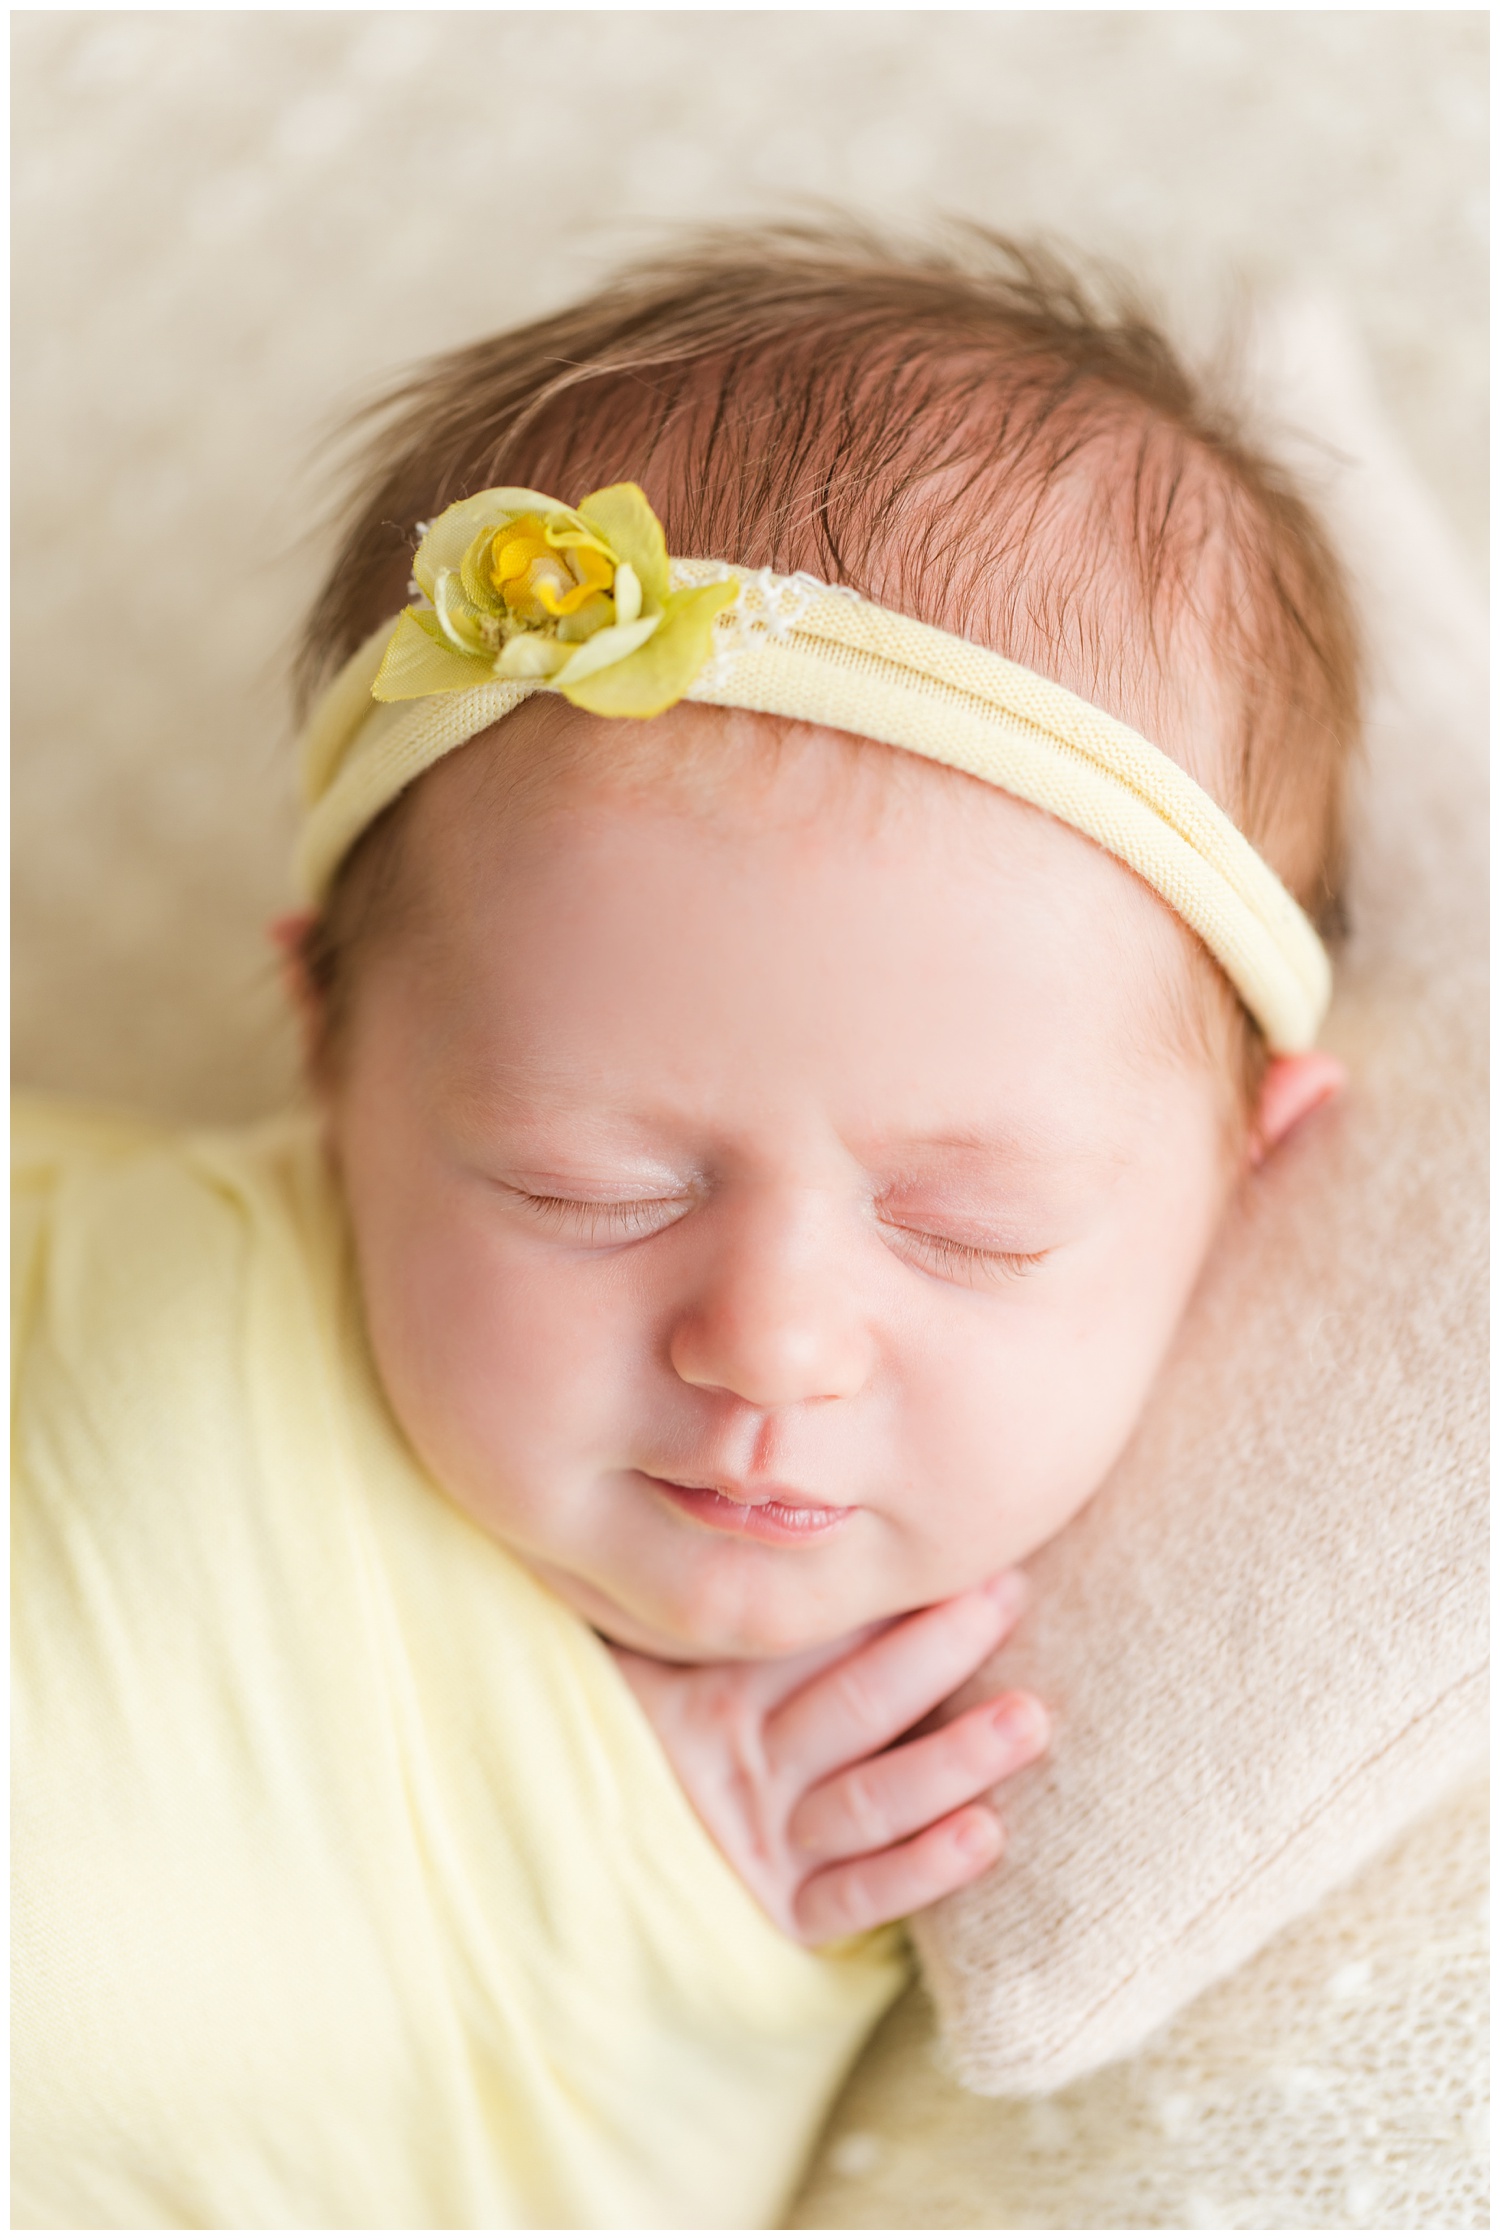 Baby Mackenzie wrapped in yellow scrunches her nose as she sleeps on a cream knit blanket | CB Studio